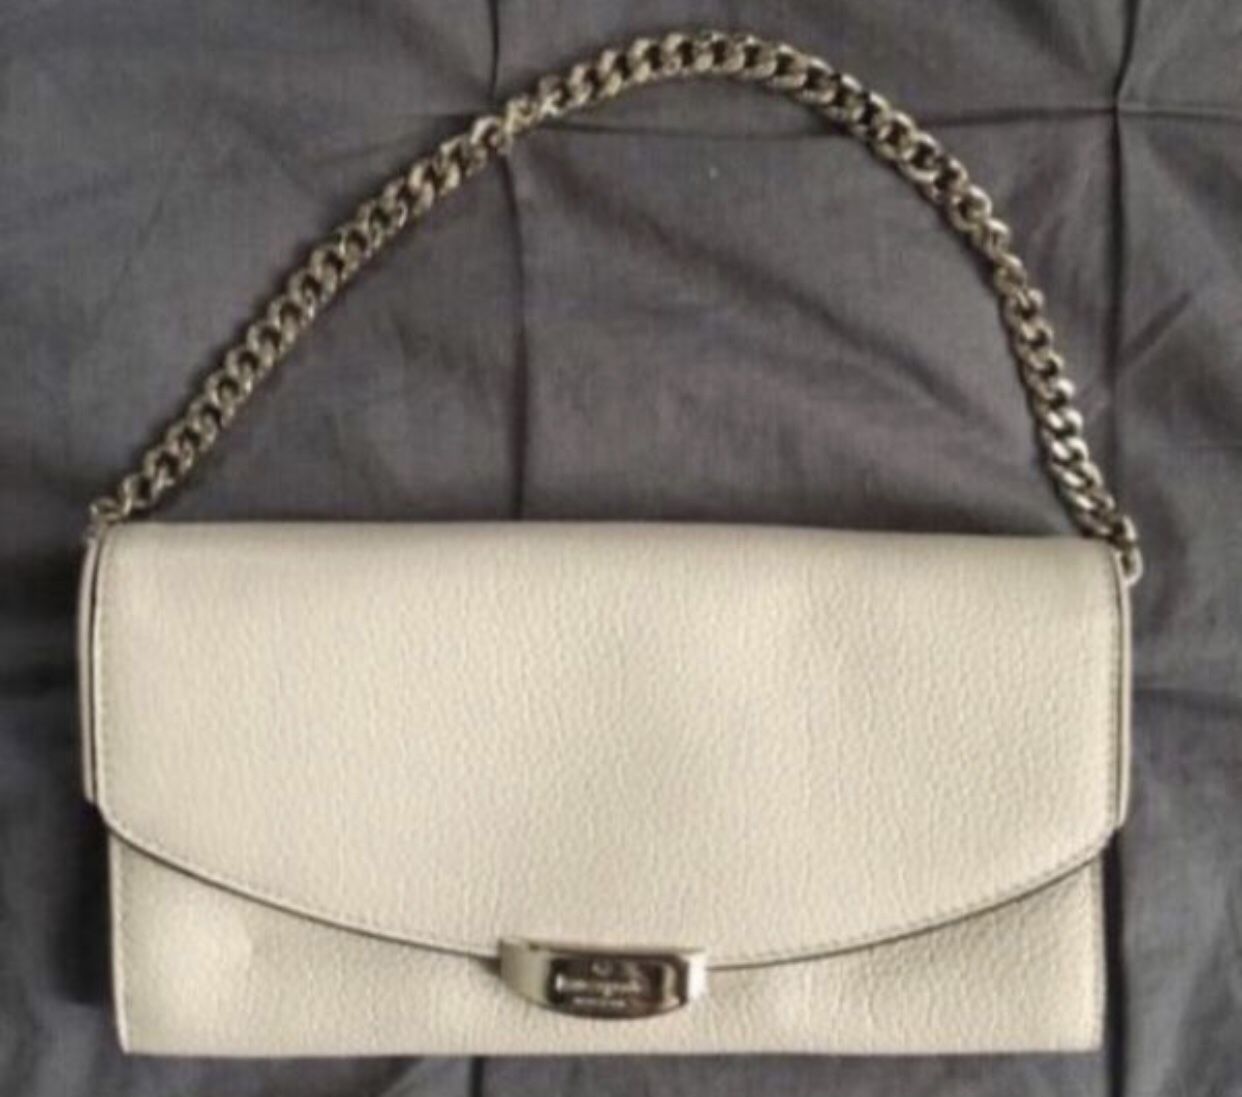 AUTHENTIC KATE SPADE ♠️ wallet style clutch with chain